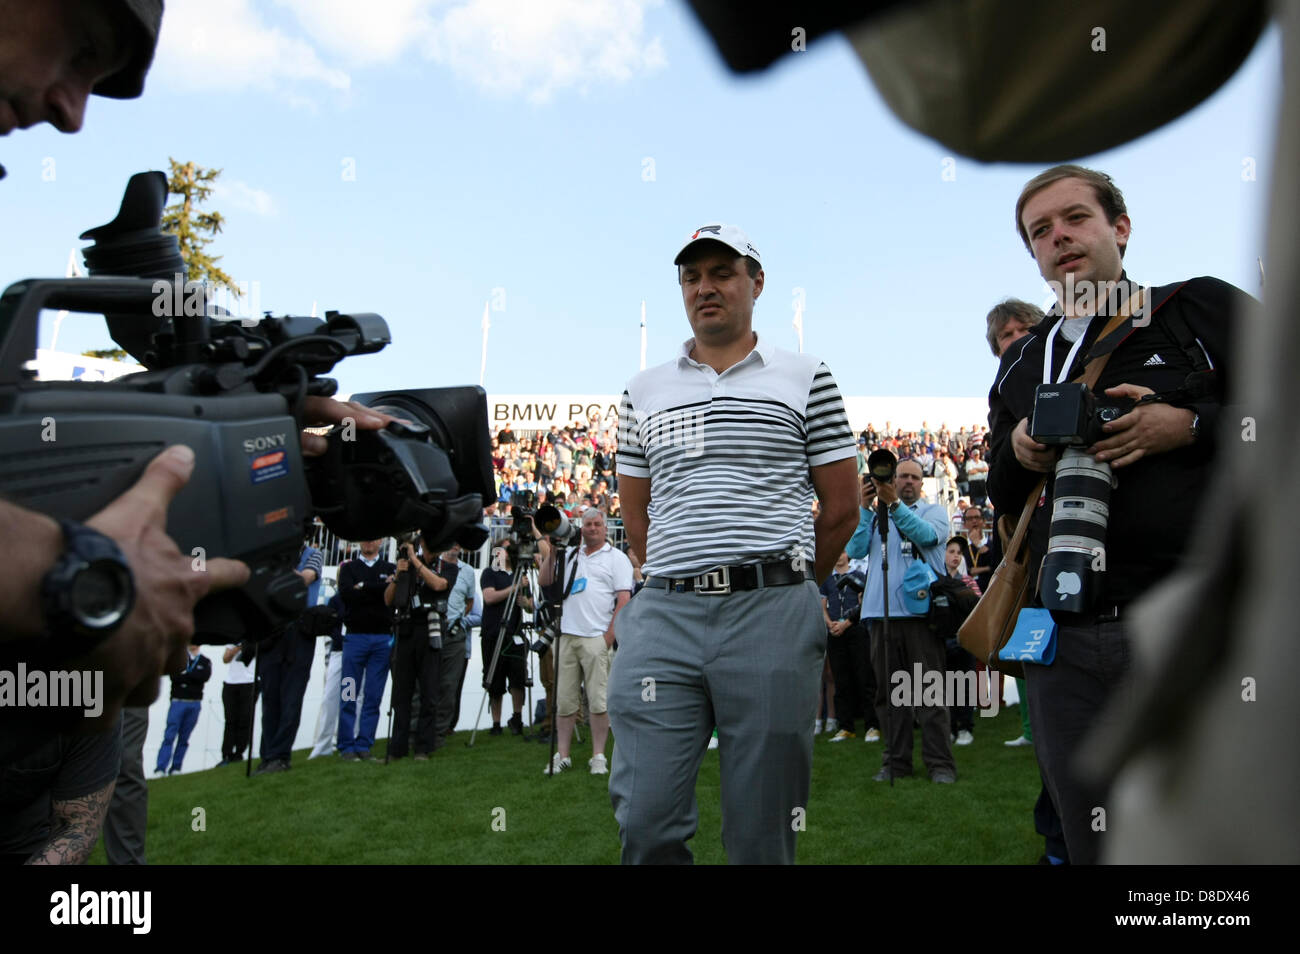 26.05.2013 Wentworth, Virginia Water, England. Simon Khan (ENG) is swamped by press media before collecting his second place medal at the 2013 BMW PGA Championship from Wentworth Golf Club. Stock Photo